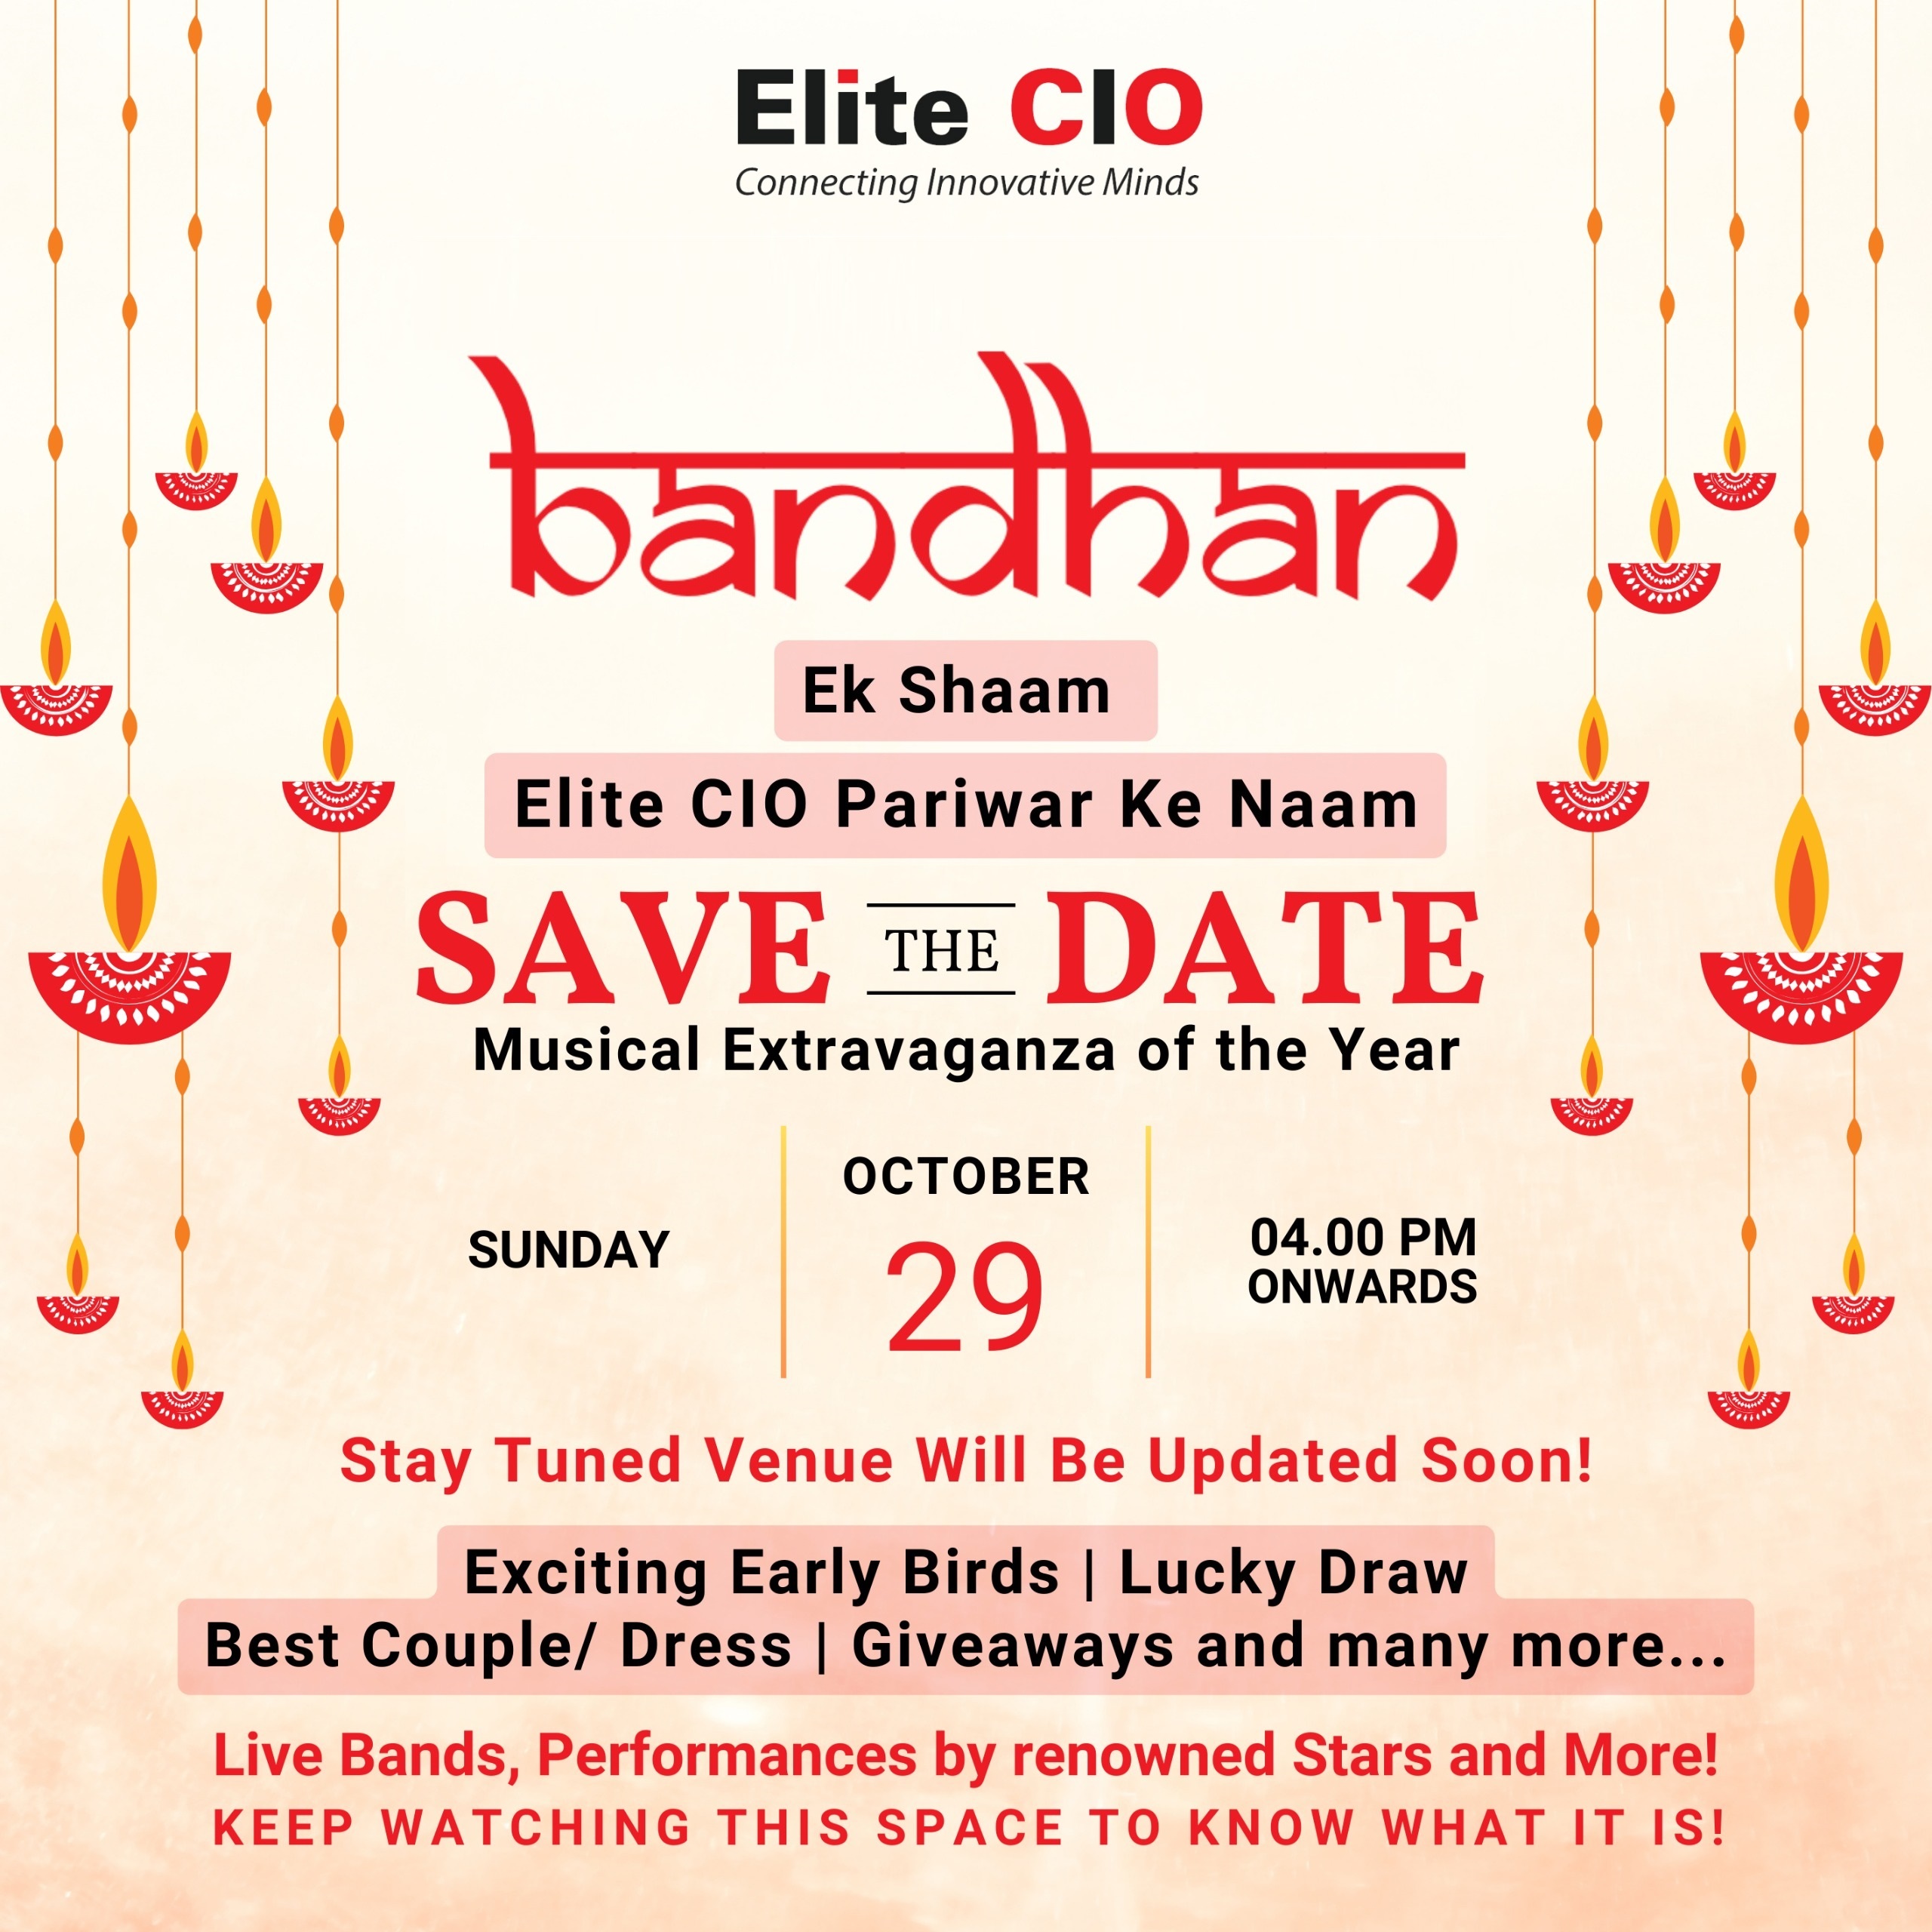 Bandhan – "Ek Shaam Elite CIO Pariwar ke Naam" - An evening fully loaded with Lots of entertainment, fun, games for kids, Mouth-watering chaat, early bird prizes, Lucky Draw, Best Couple / Dress, Kids performance of the day, and hefty giveaways and so much more.